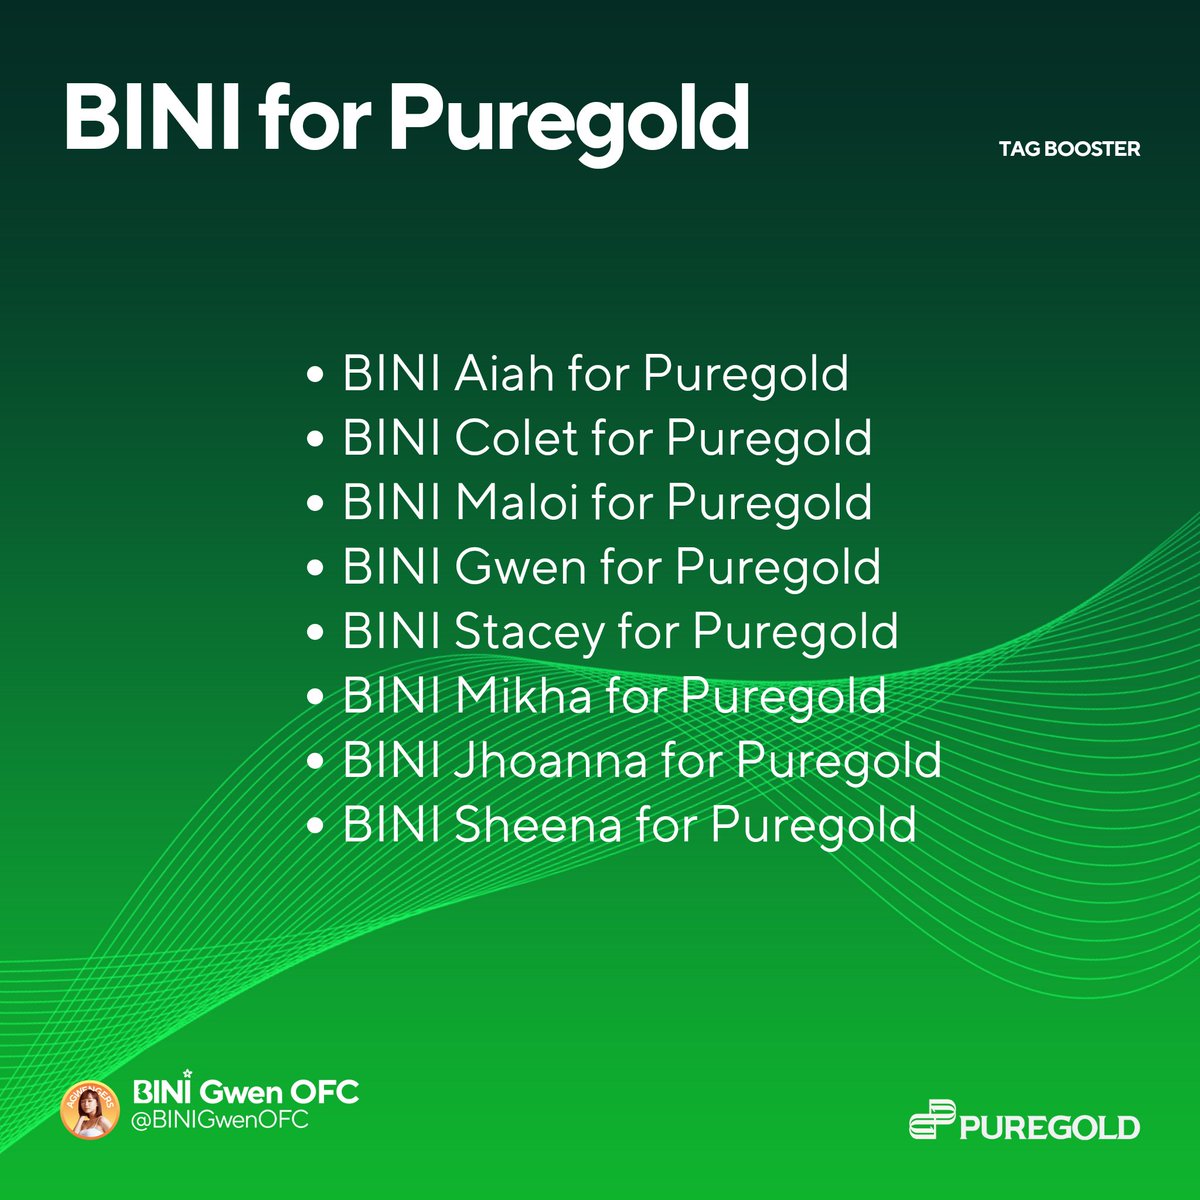 [Tag Booster]

BINI for Puregold! Kindly reply with the official tags.

BINI LOVES PUREGOLD

#PuregoldxBINI #AlwaysPanalo
@BINI_ph @Puregold_PH